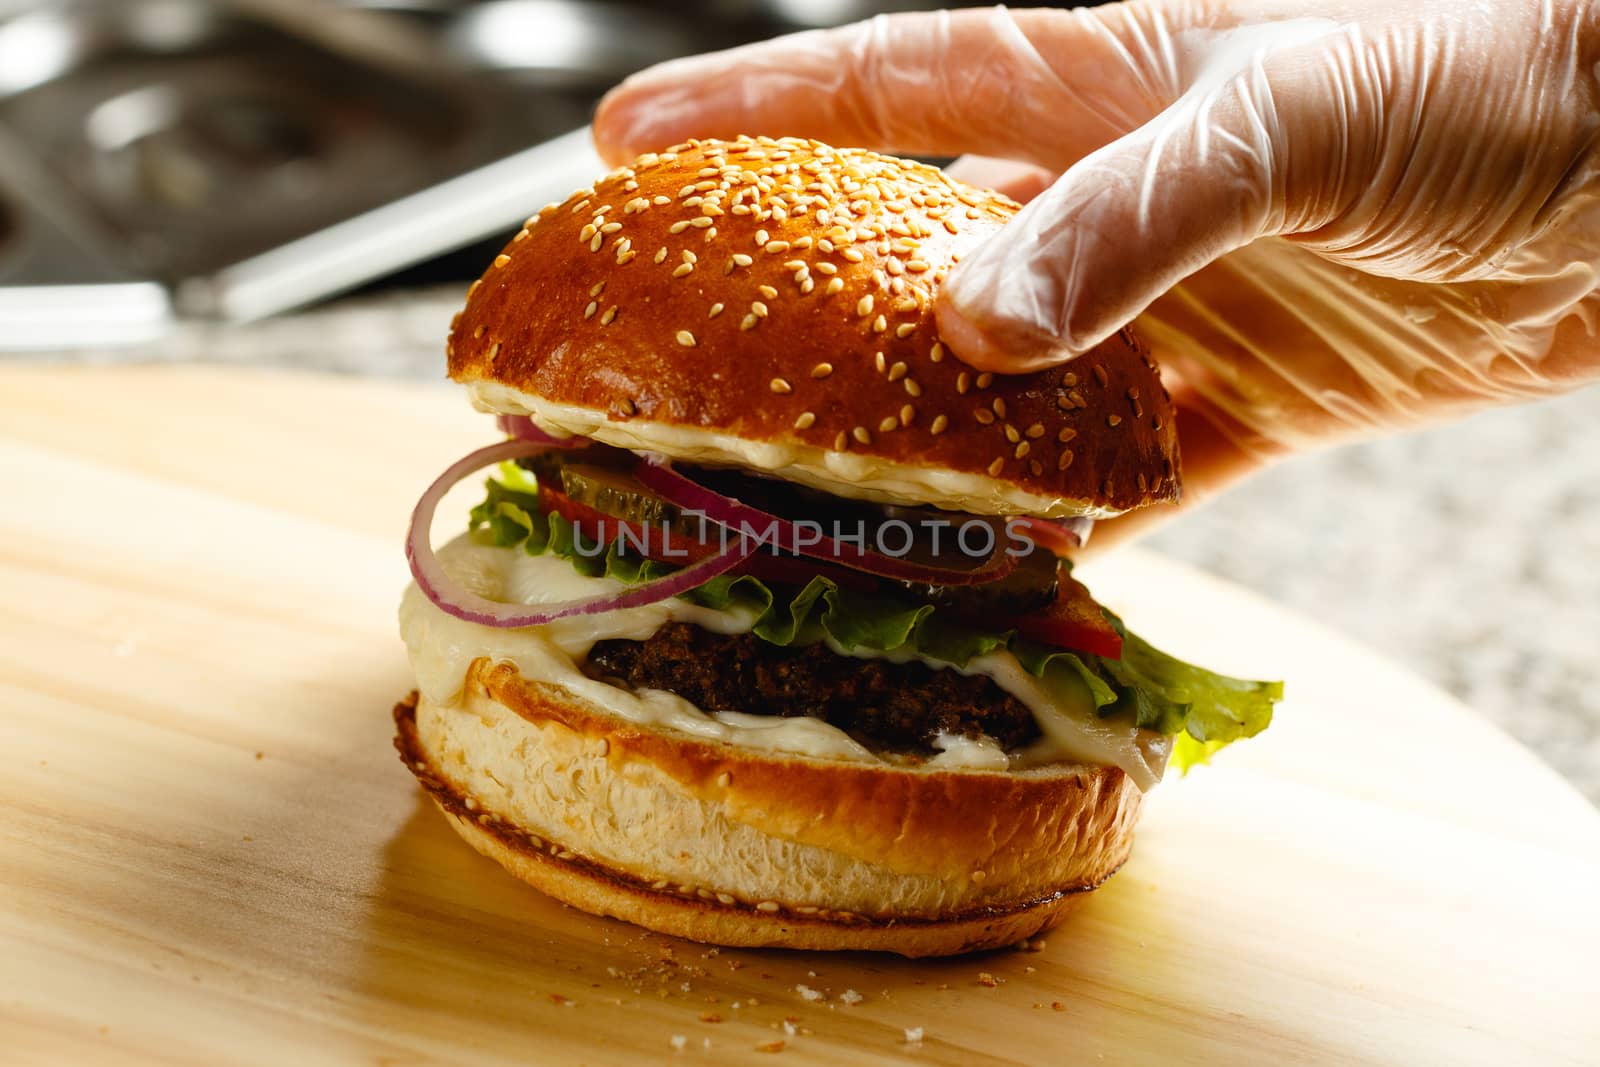 The woman's hand makes the finishing touch. Puts the bun on the burger closeup photo